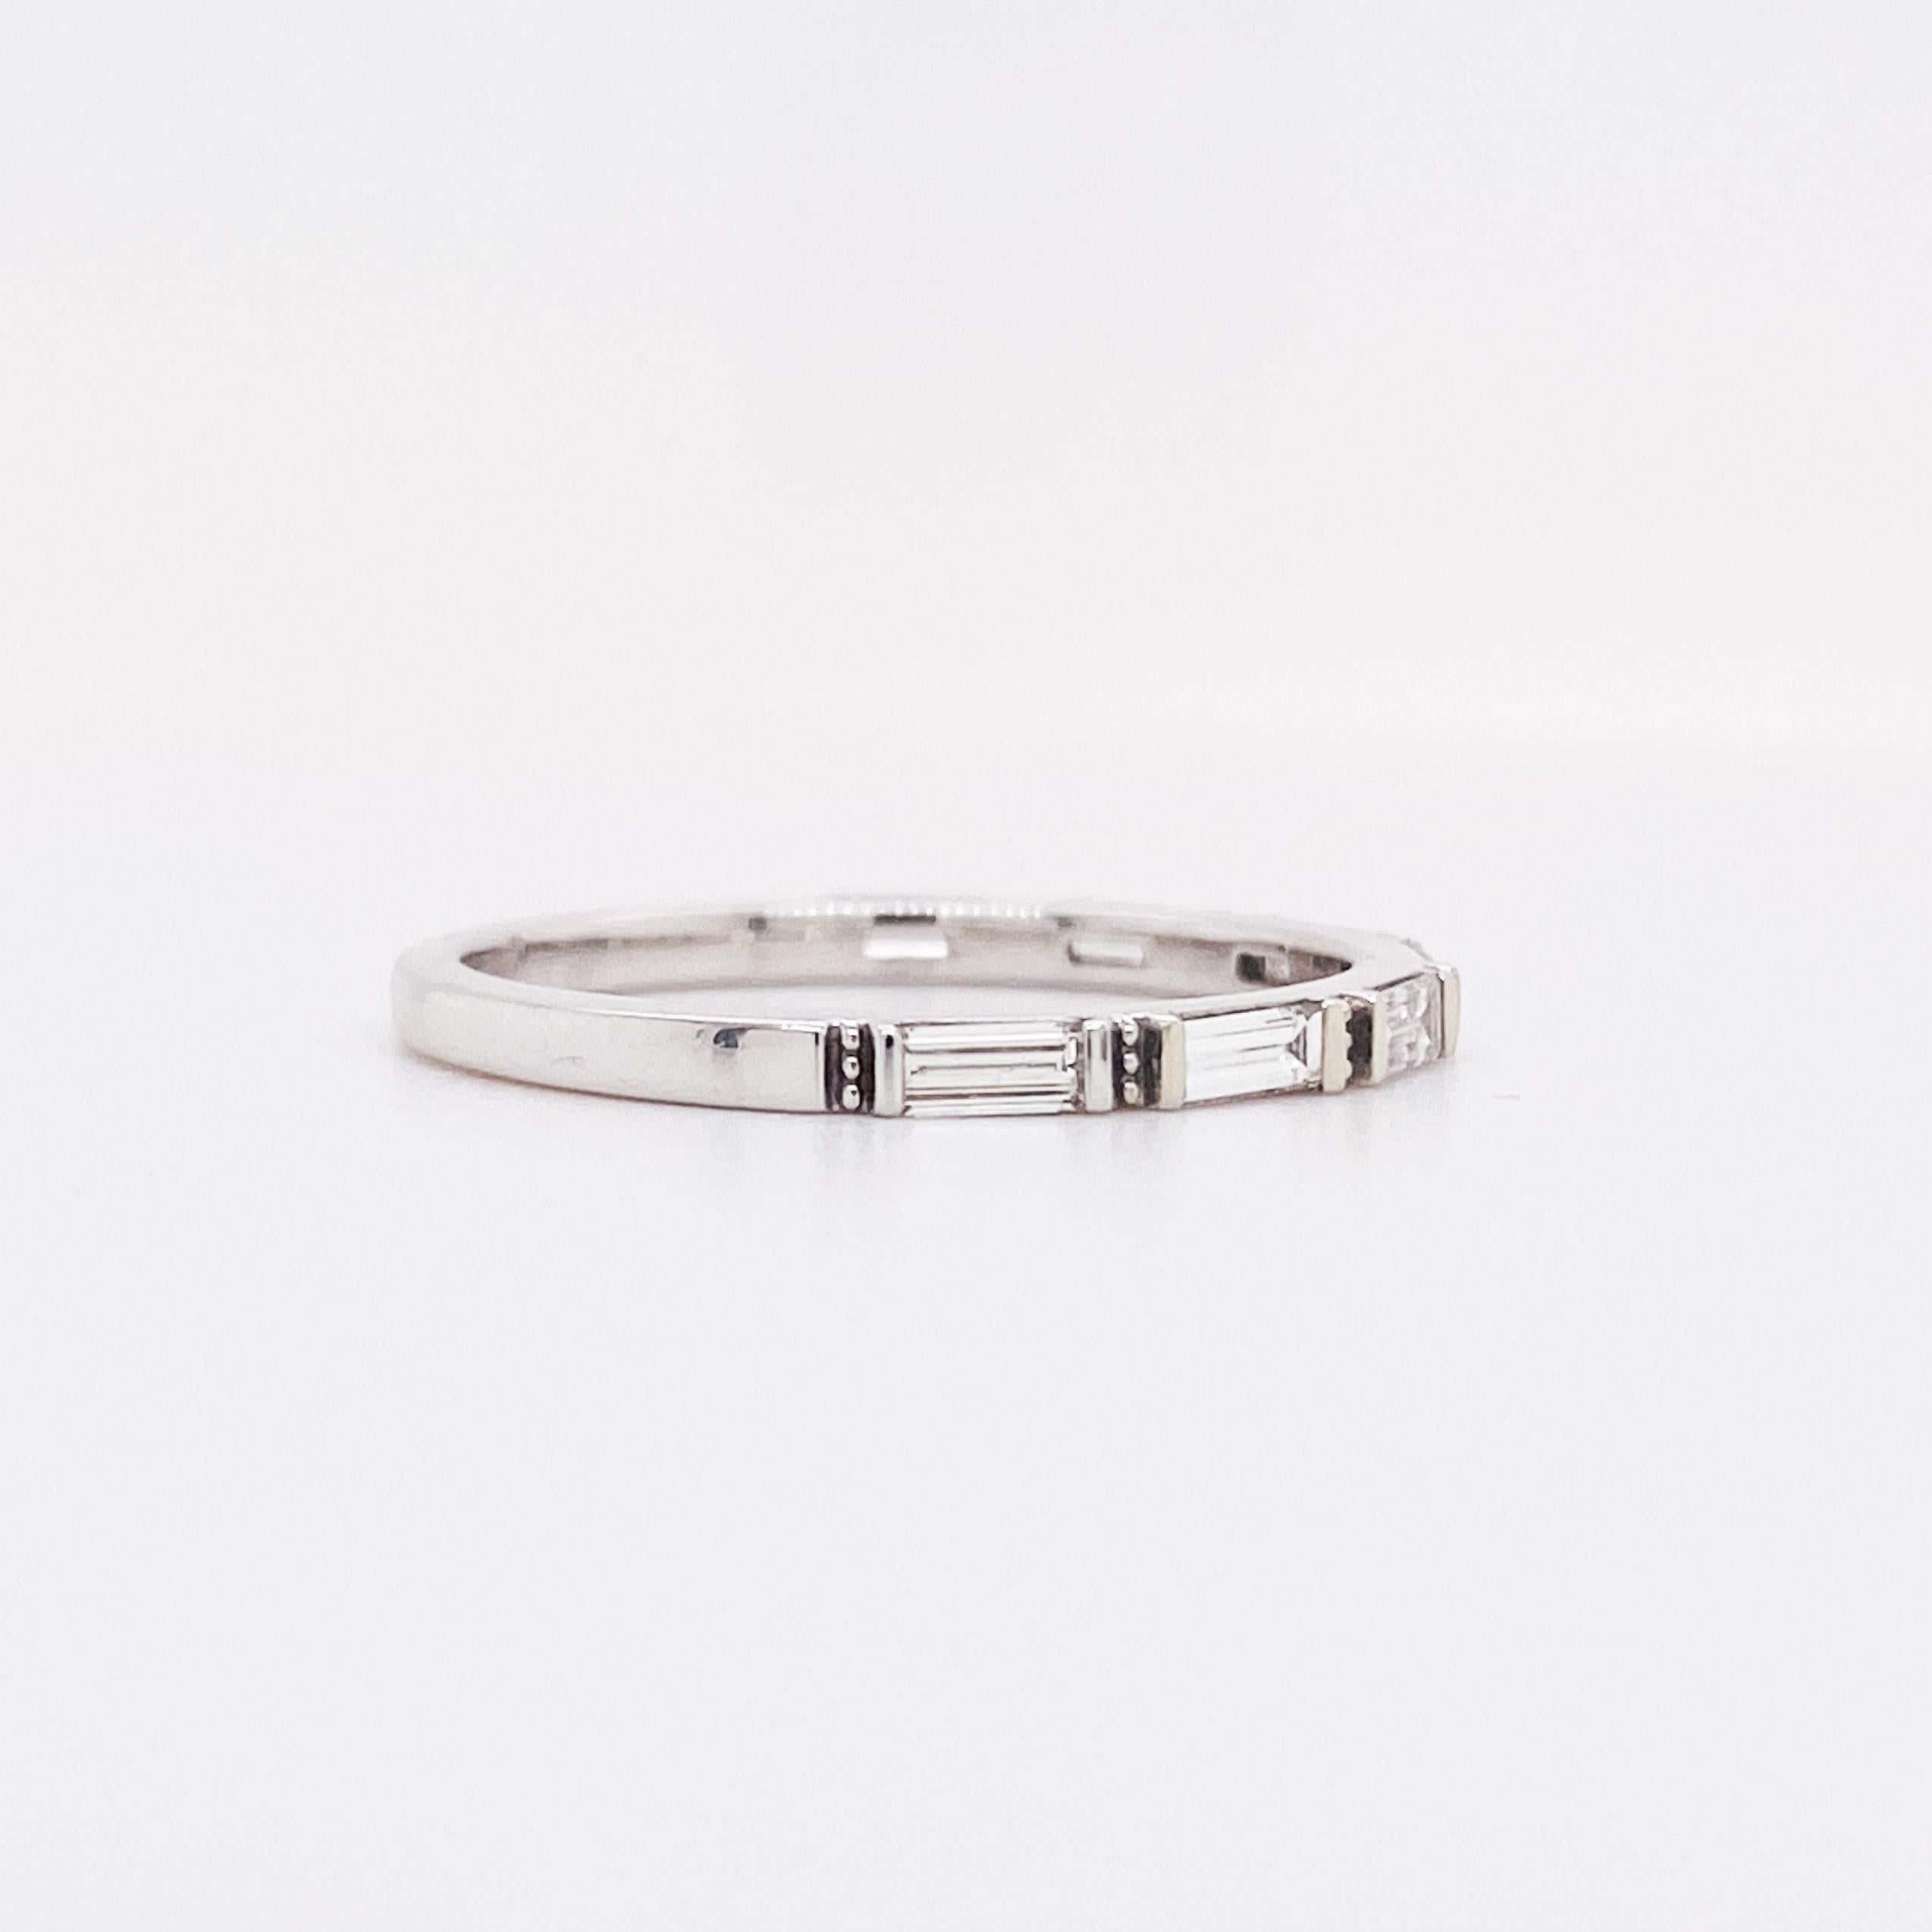 This slender baguette diamond band is perfect to stack up with your ring against its smooth flat sides. The clean lines of the horizontal row of seven baguettes are accented between each stone with a vertical row of dots. The ring design compliments